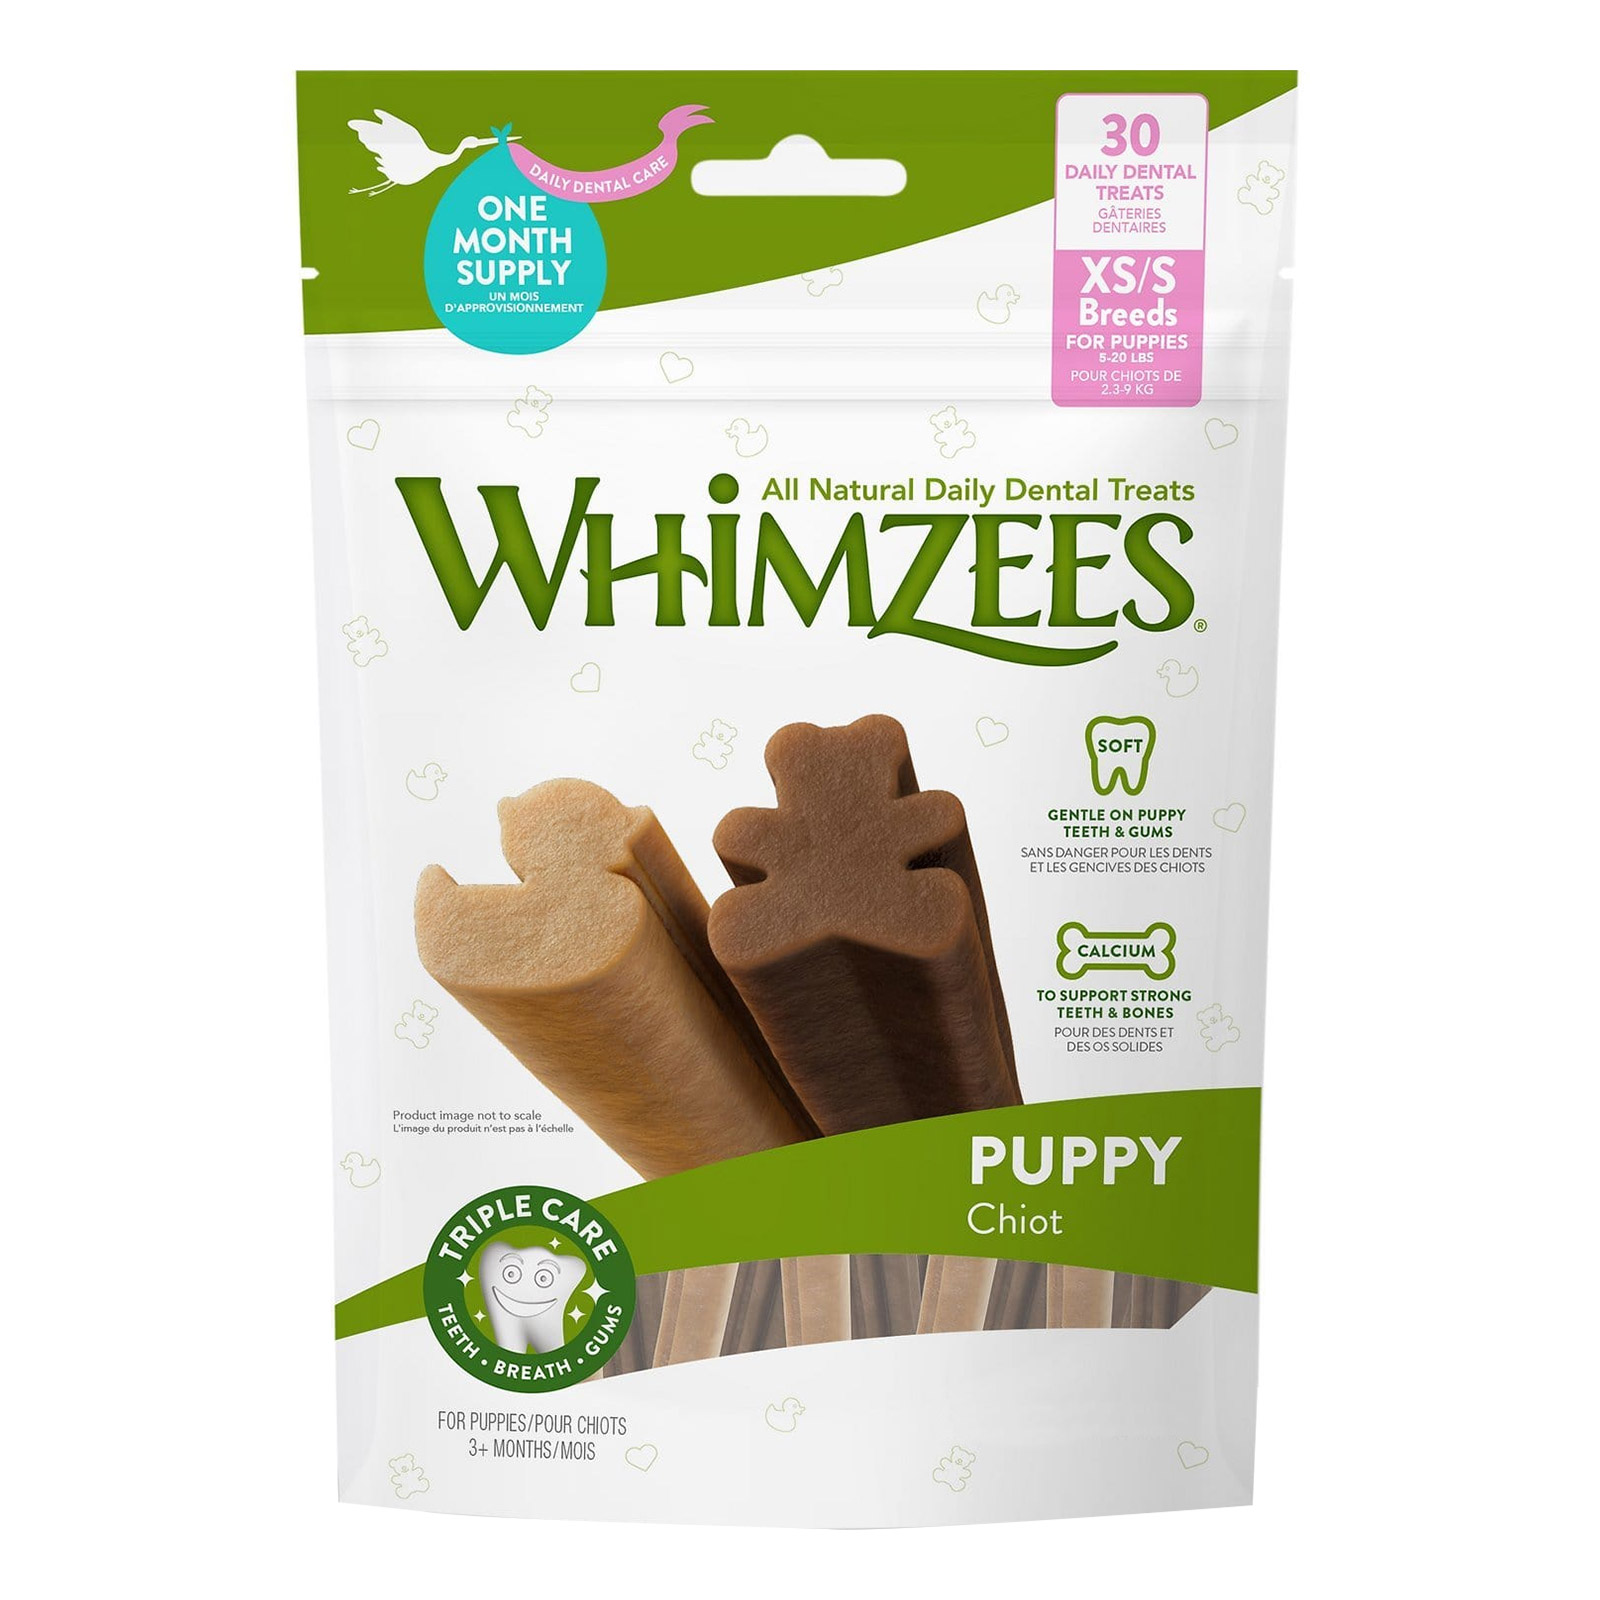 Whimzees Puppy Valuebag Dental Treats Xsmall/Small 30'S for Food